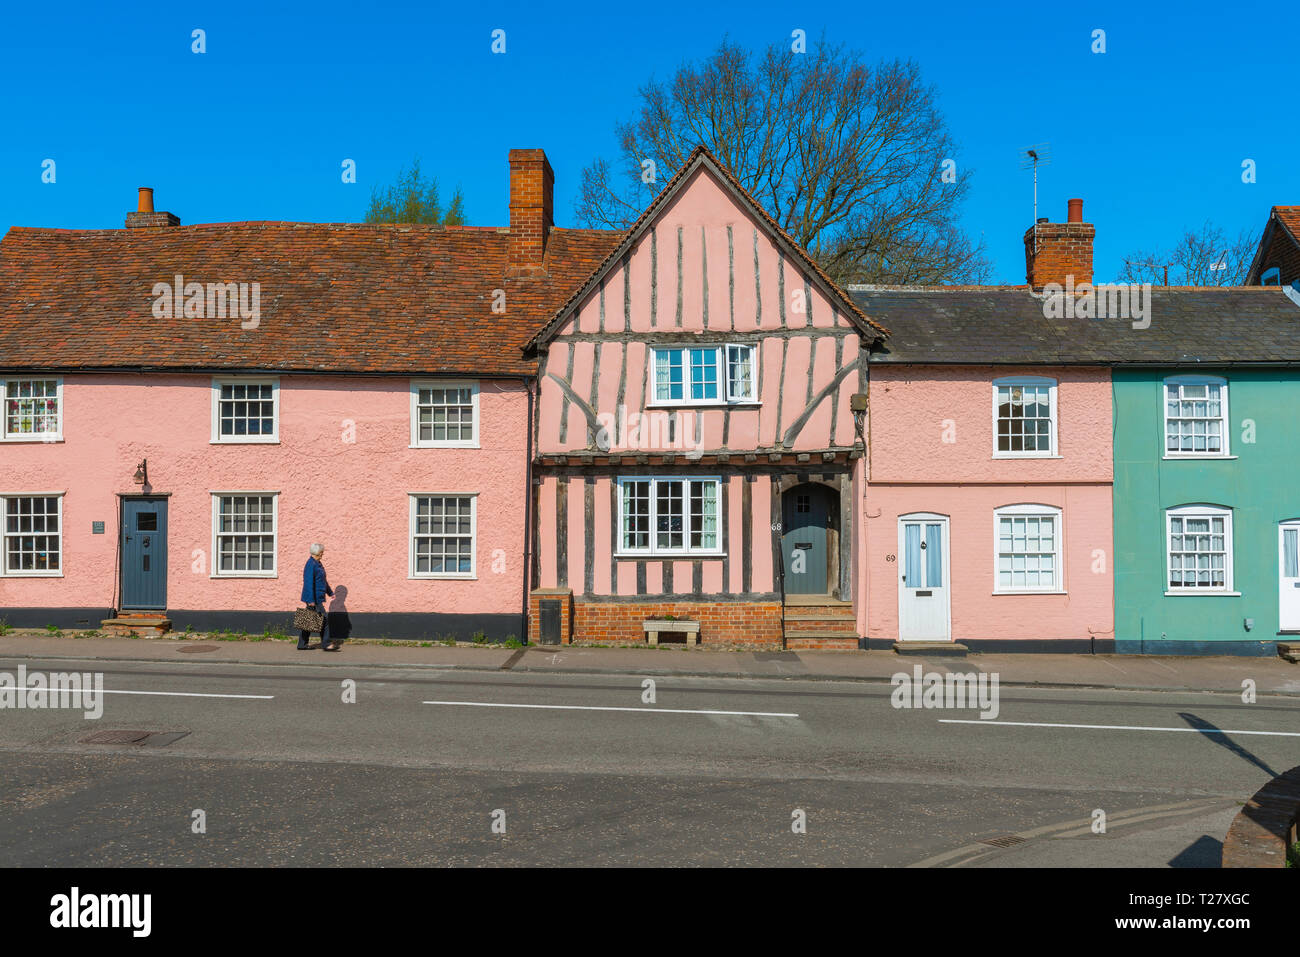 Suffolk pink, view in summer of historic buildings in Lavenham High Street  painted a characteristic pink colour typical of old Suffolk buildings, UK. Stock Photo